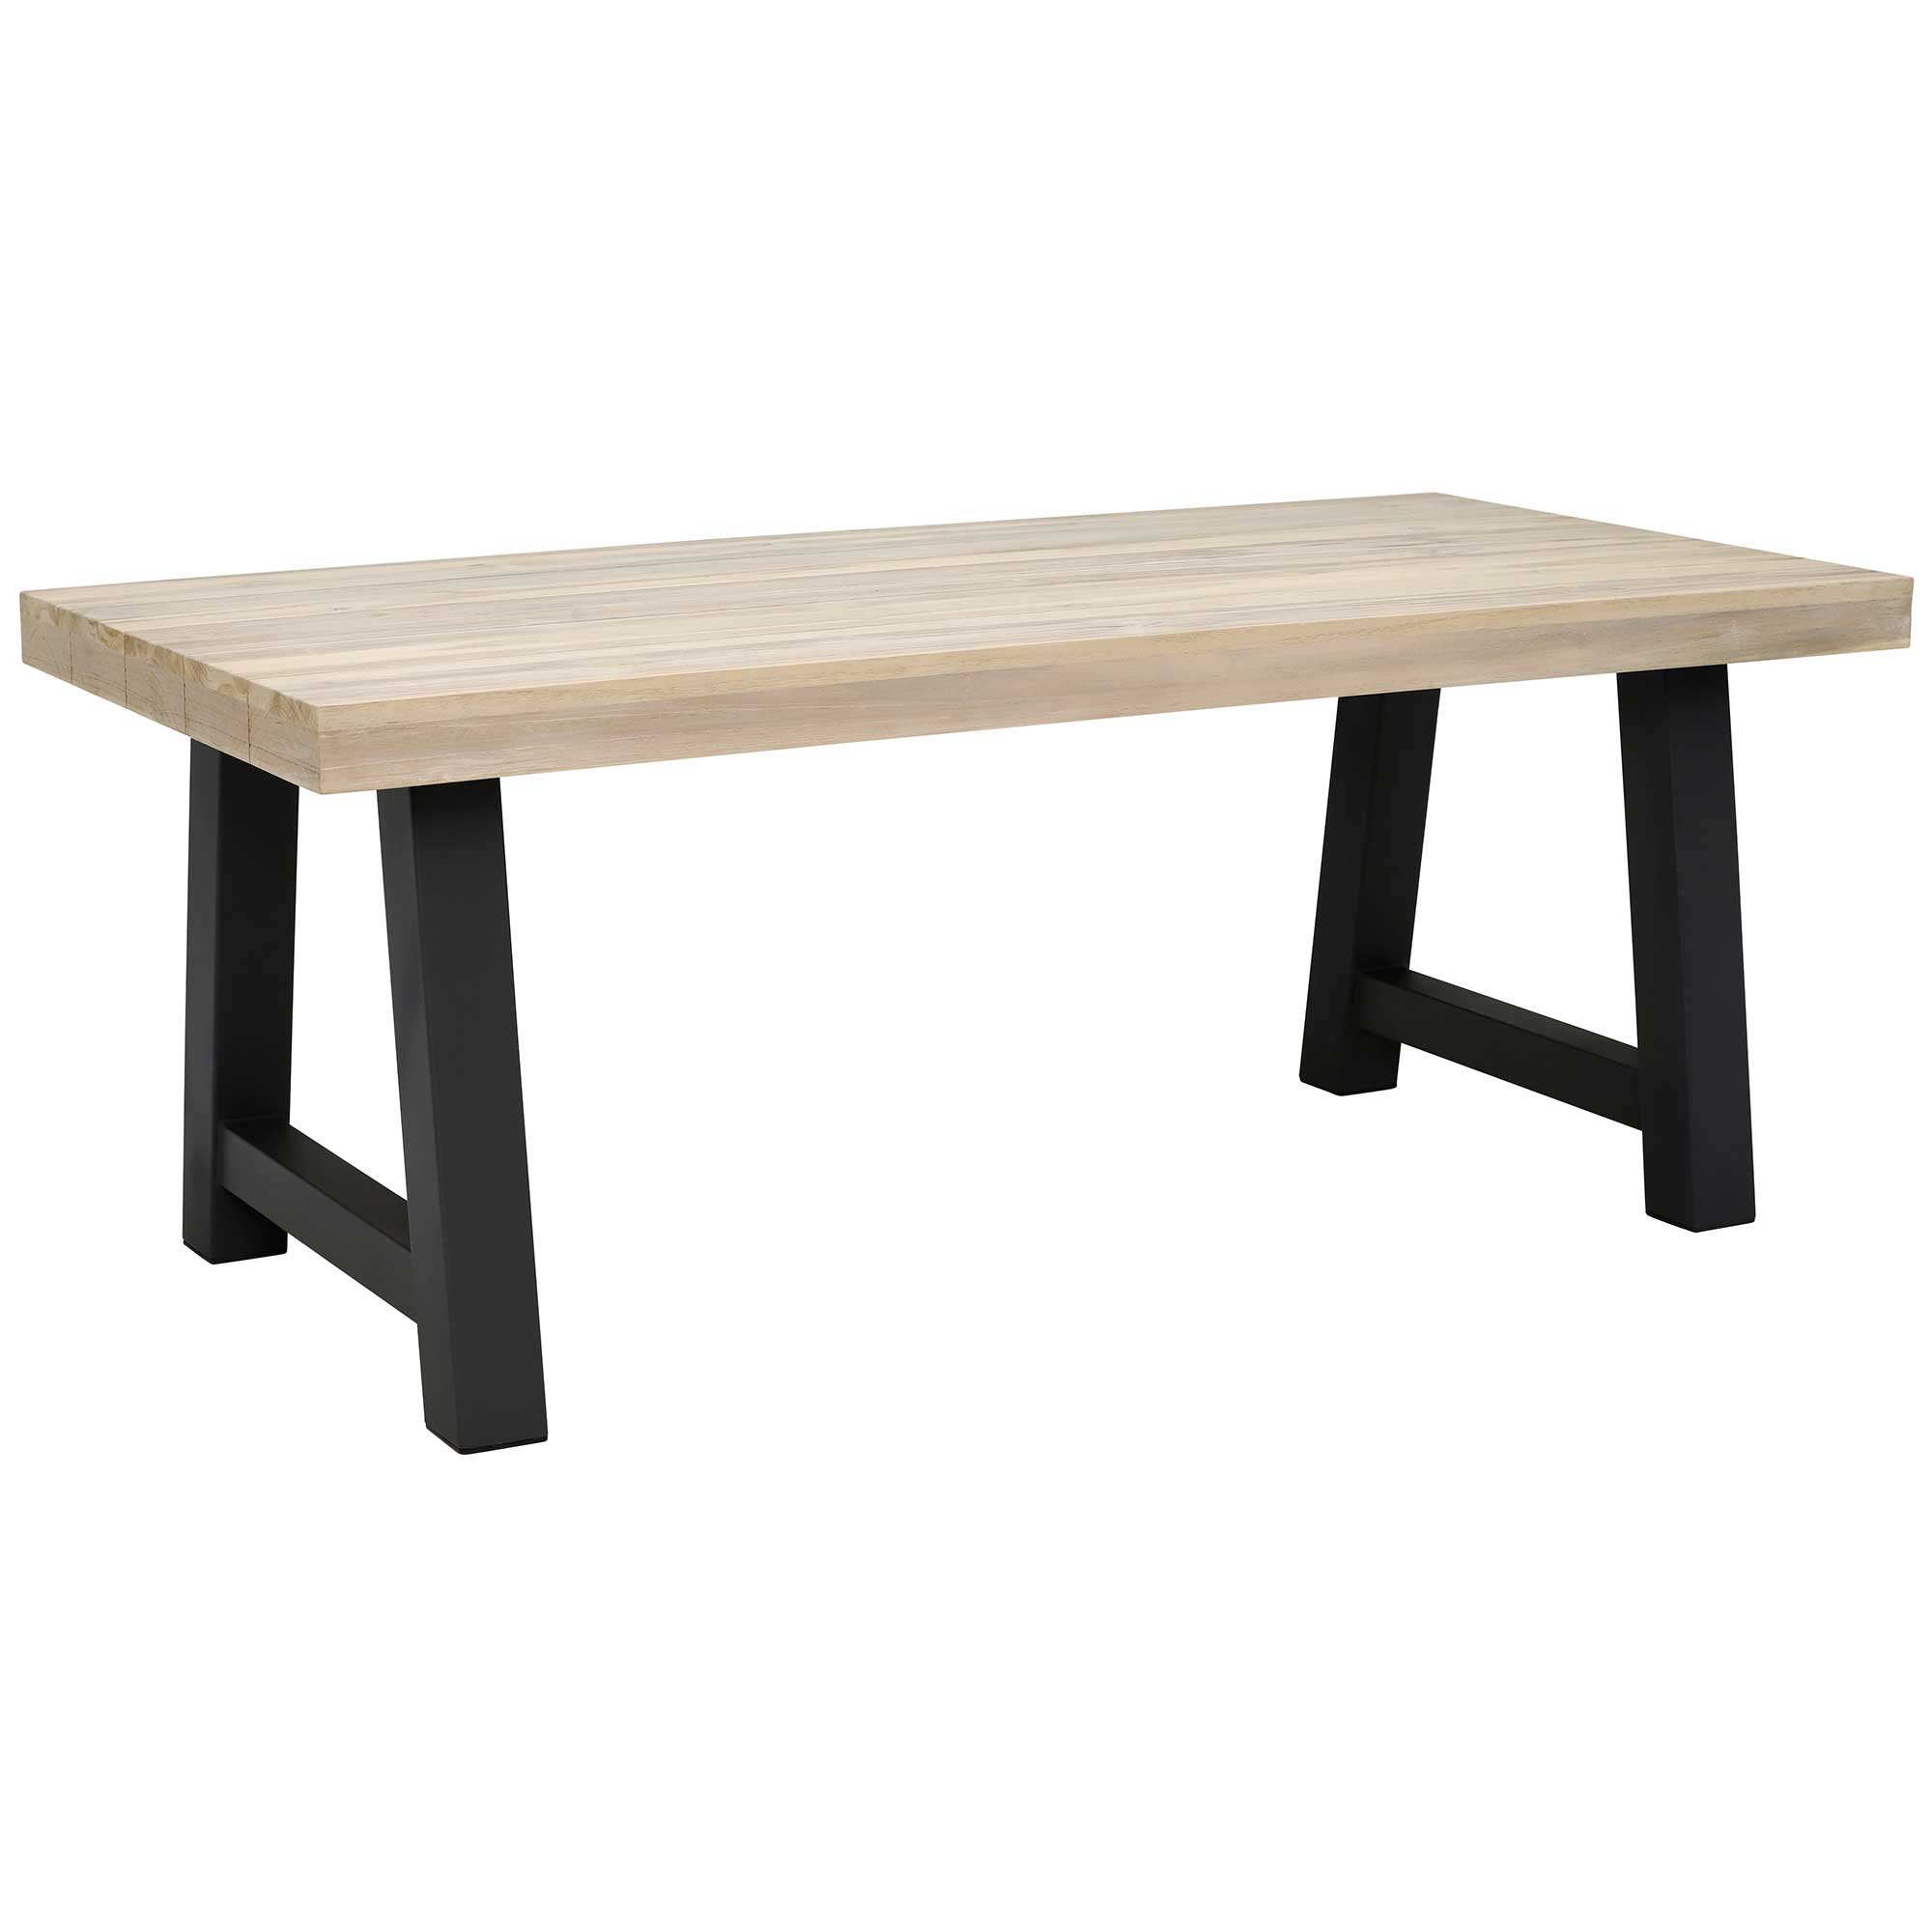 Beach Garden Dining Table, Graphite And Aged Teak 240cm